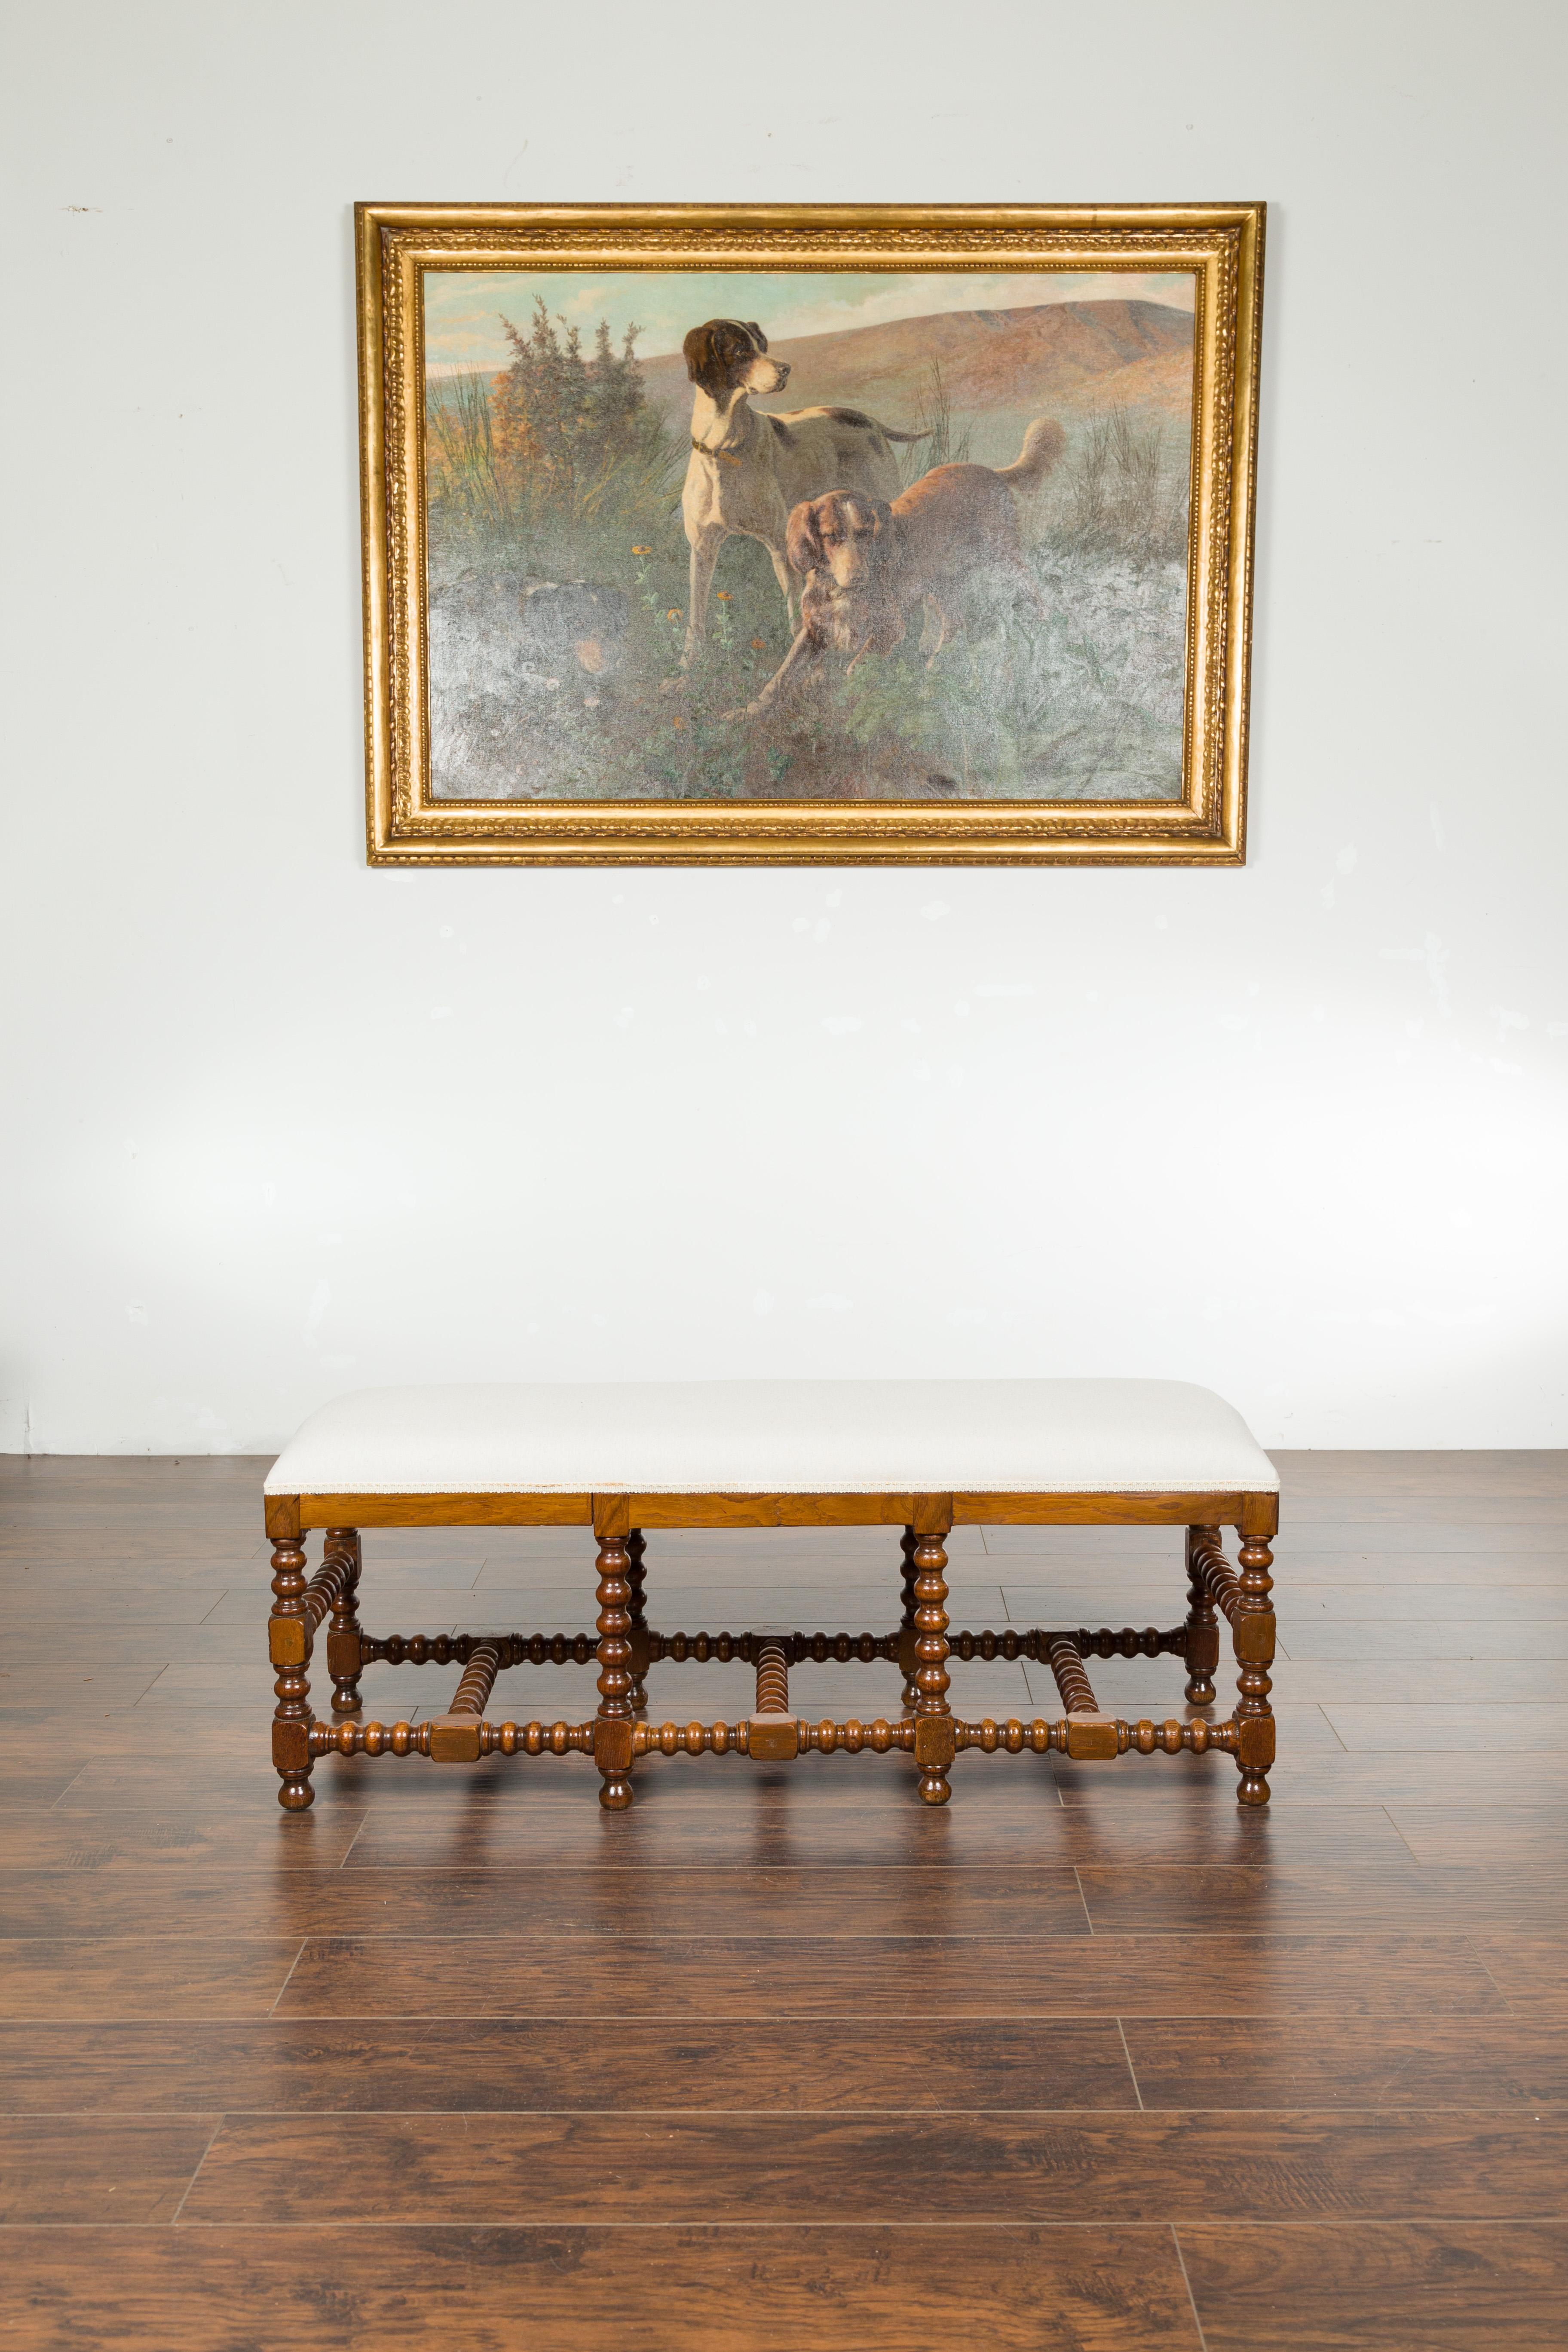 An English bobbin leg bench from the late 19th century, with new upholstery and cross stretchers. Created in England during the last quarter of the 19th century, this bench features a rectangular seat newly upholstered with a neutral toned fabric